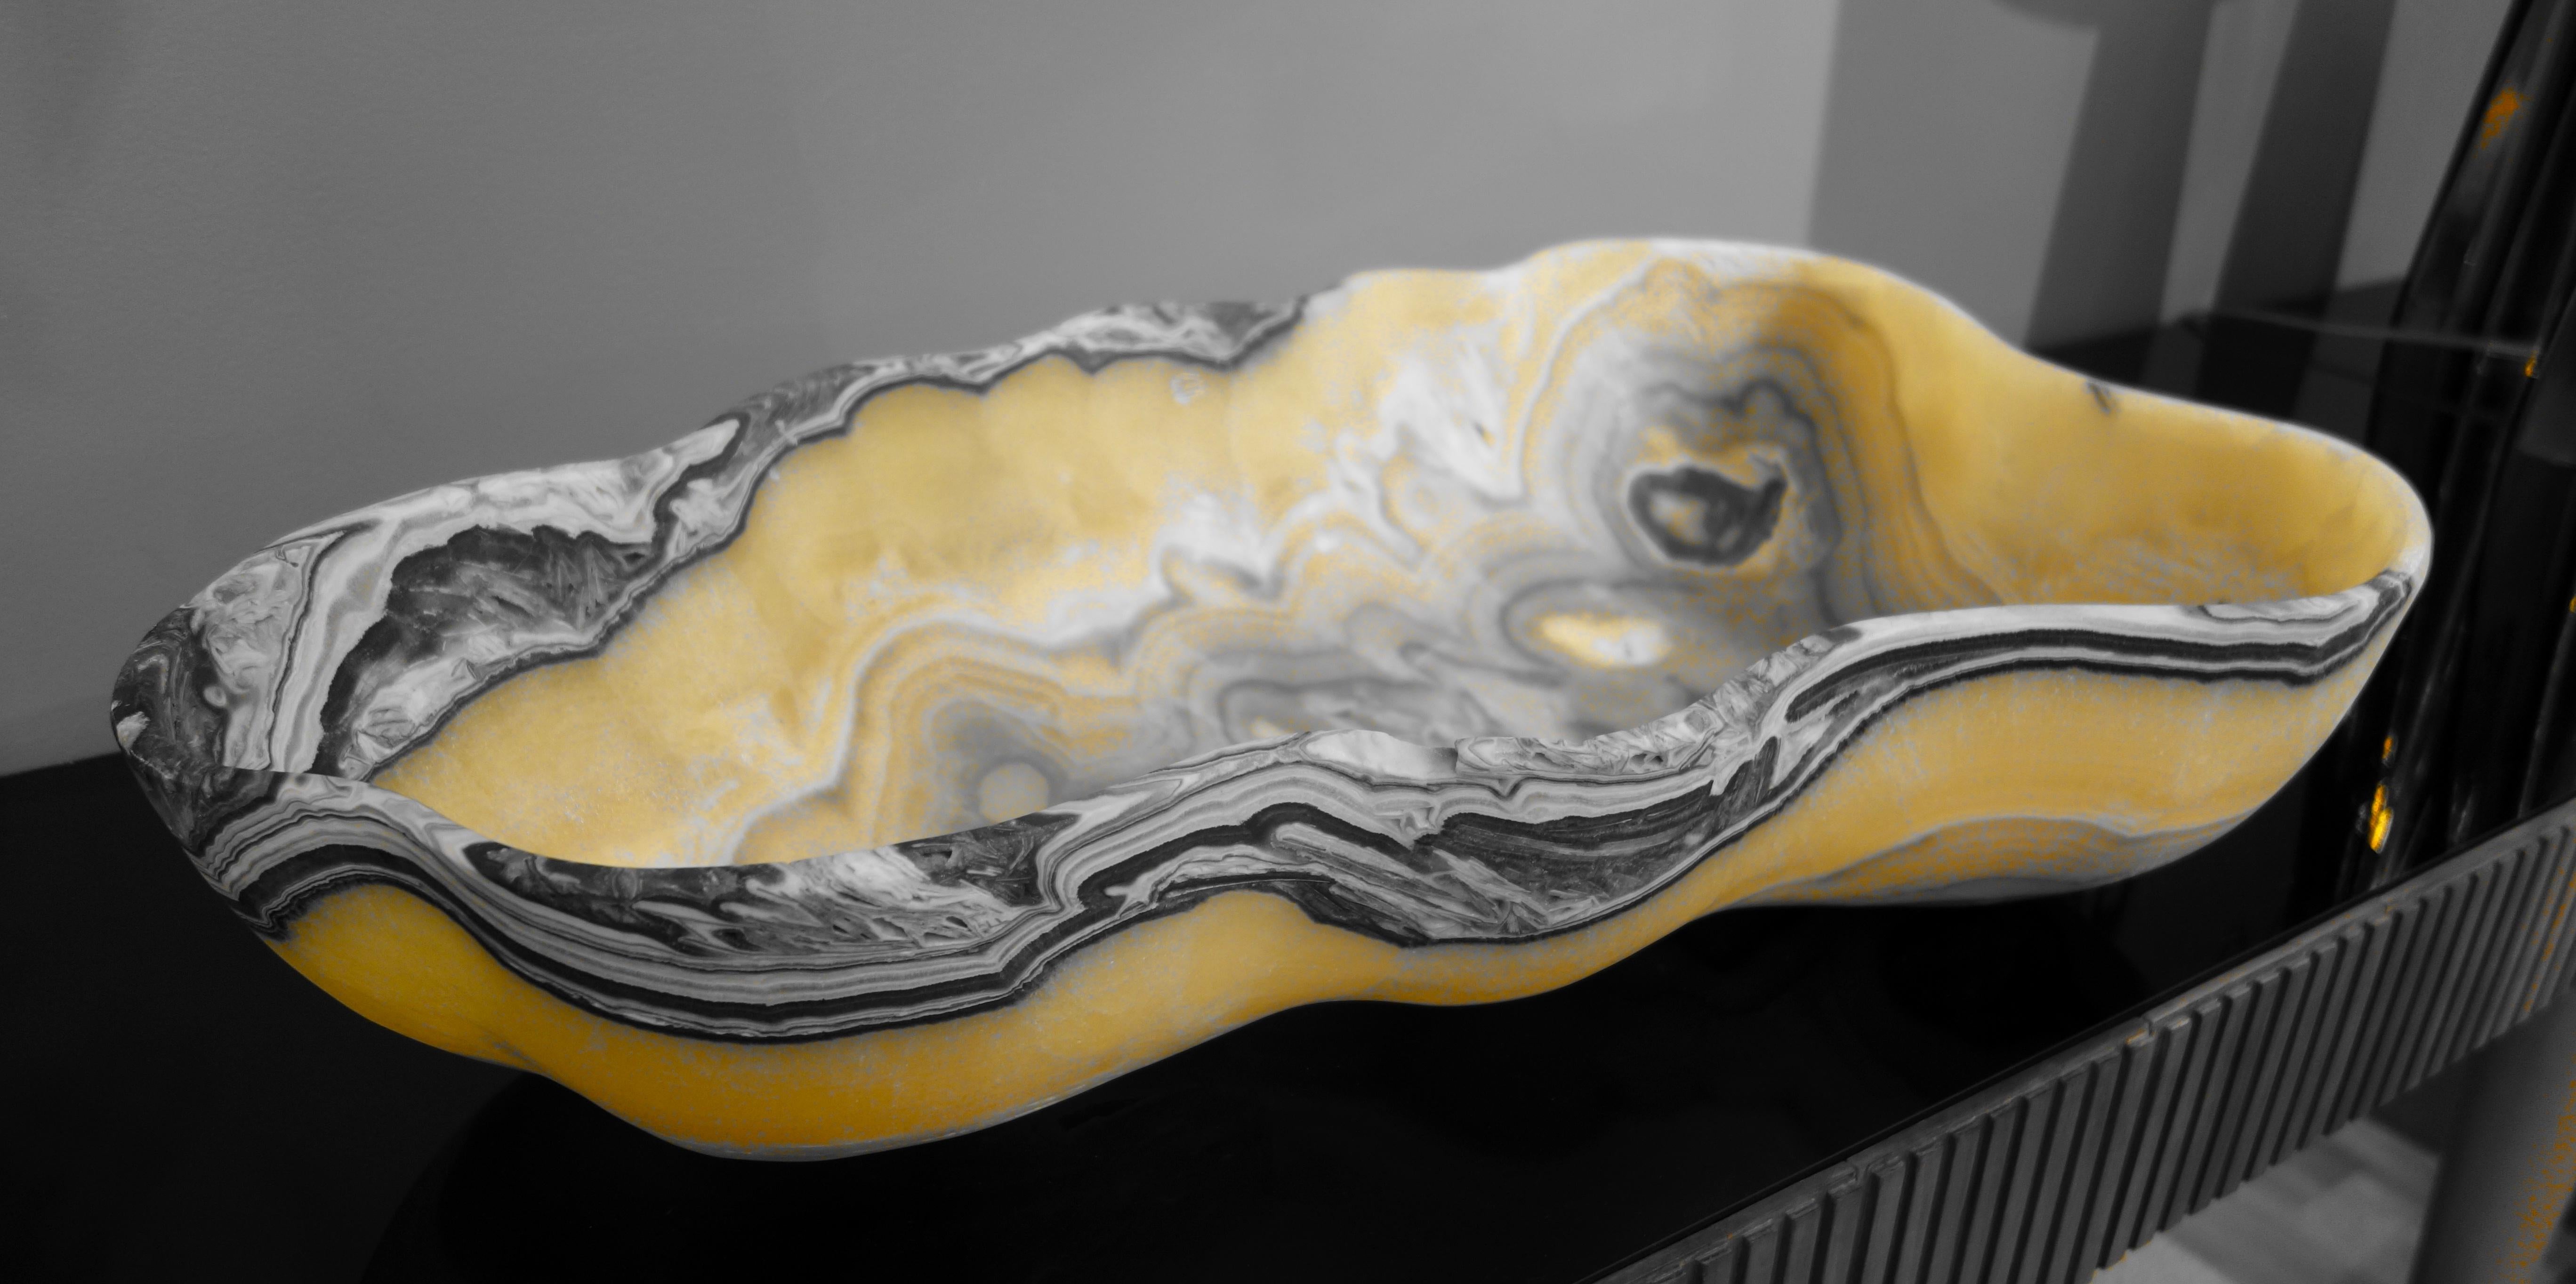 A very large hand carved Mexican onyx bowl or centerpiece in striking striations of gold, charcoal gray and white with natural negative spaces.